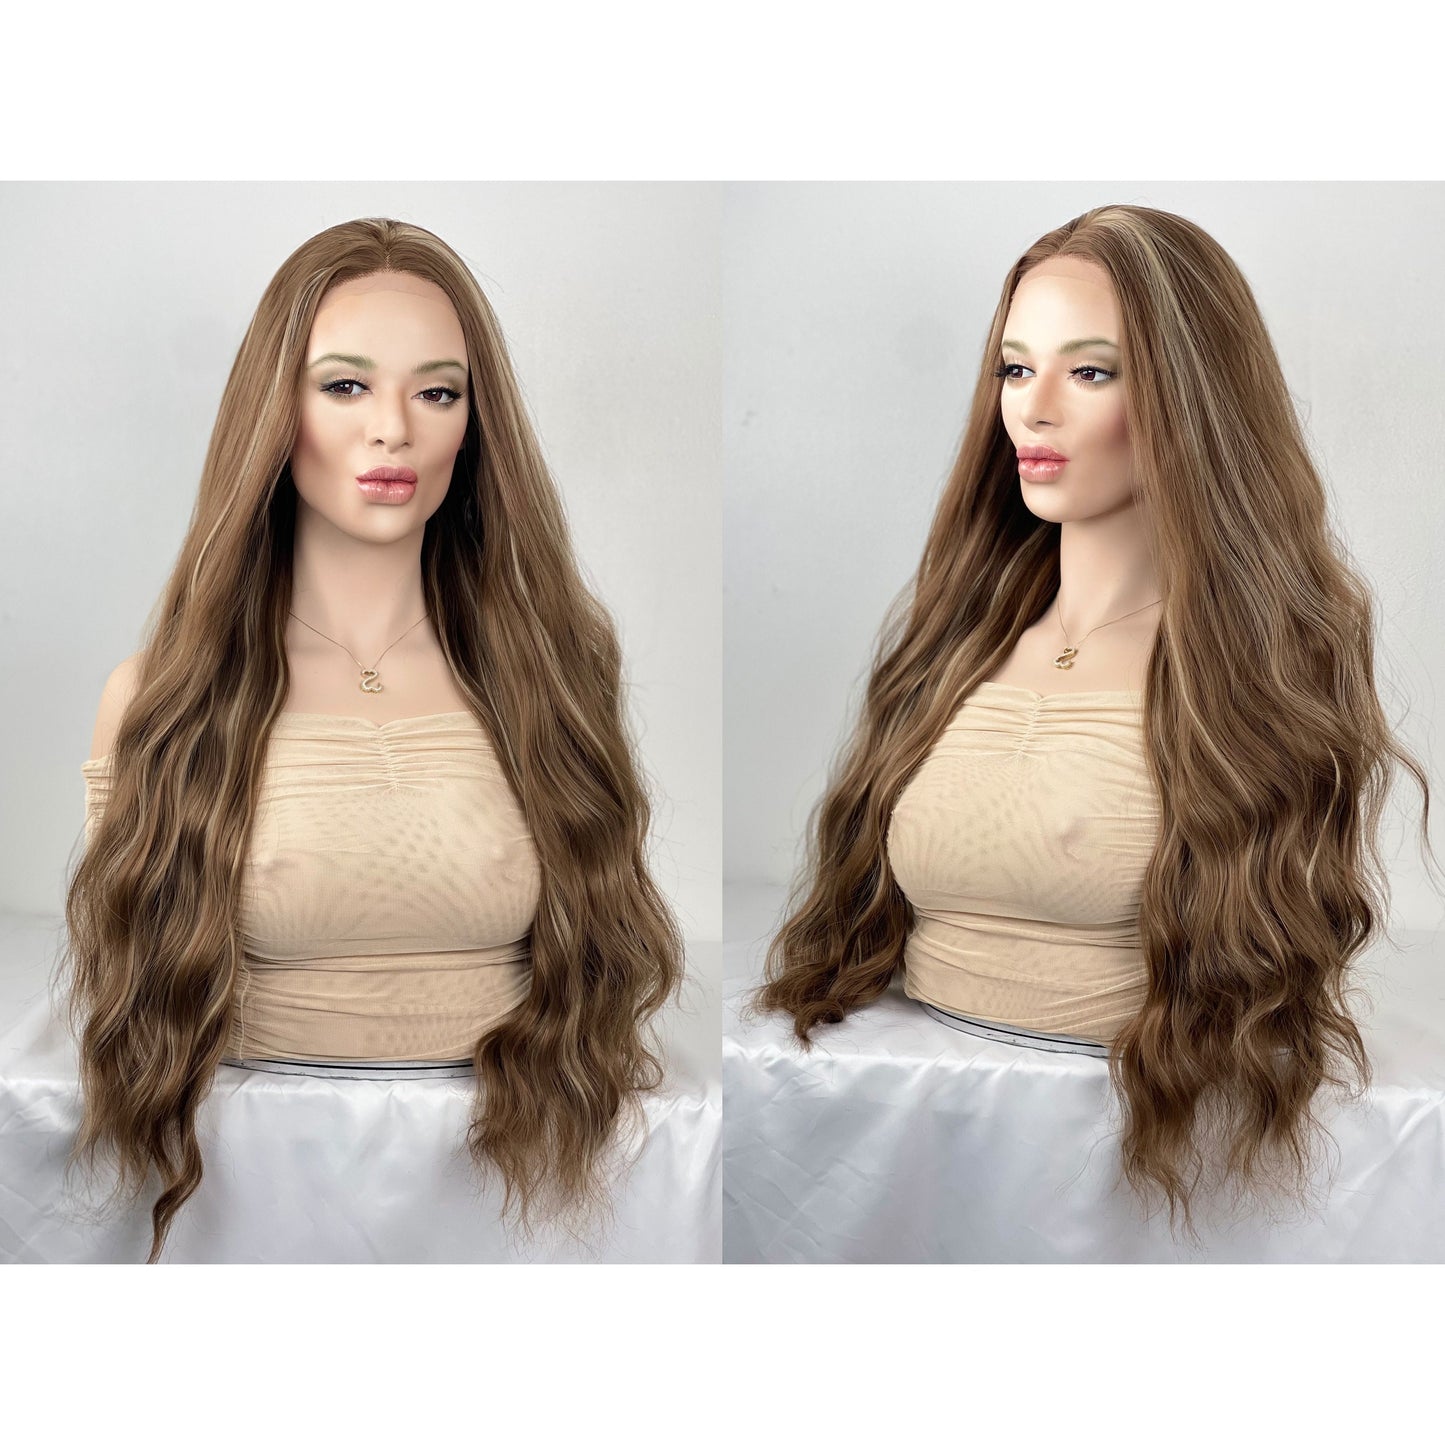 Medium Brown Blonde Highlights Wavy 13x3 Preplucked Free Part Wig, Swiss Lace Front, Heat Resistant Human Hair Blend Wig